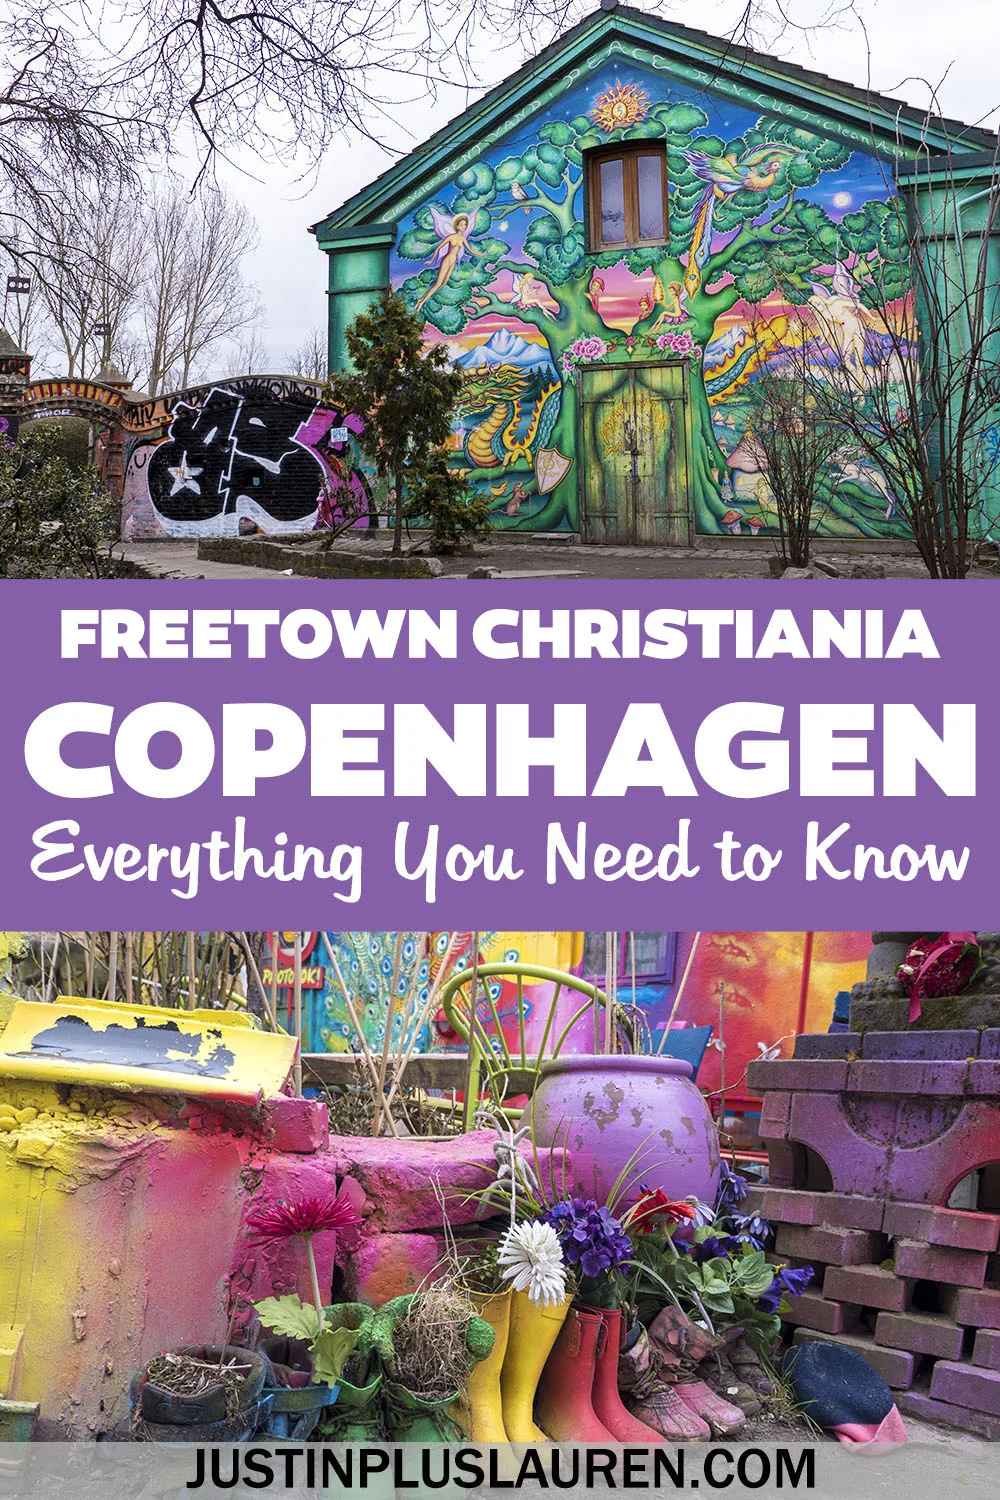 Freetown Christiania Copenhagen is a hippie commune with street art, veg food & an intriguing counterculture. Here's how to plan your visit.